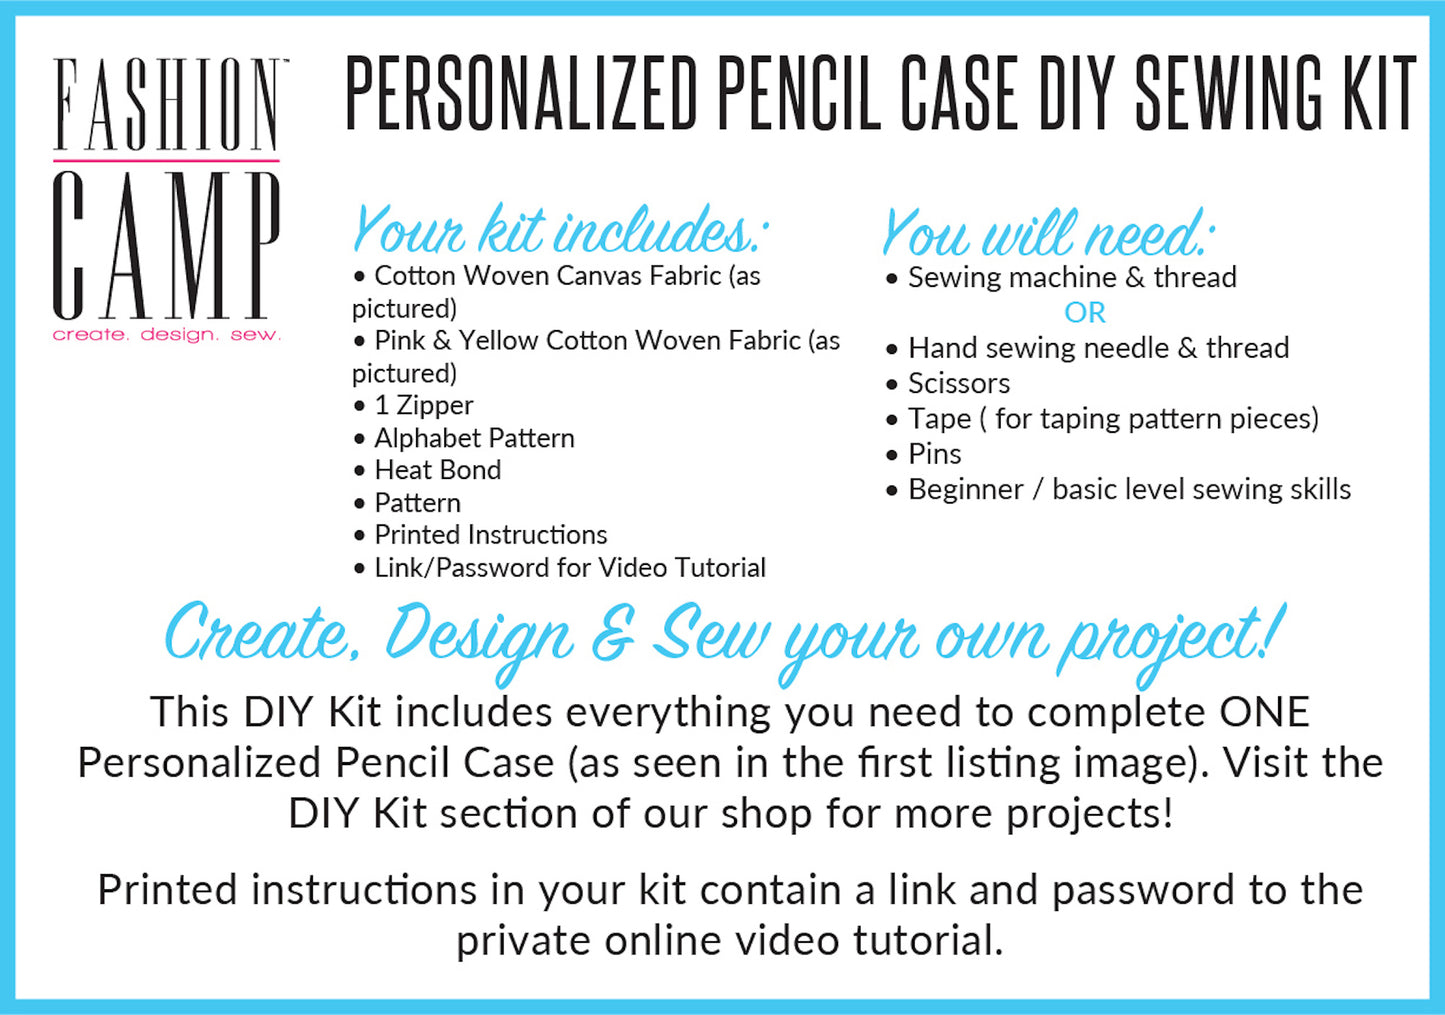 DIY Personalized Pencil Case Sewing Kit & Video Tutorial